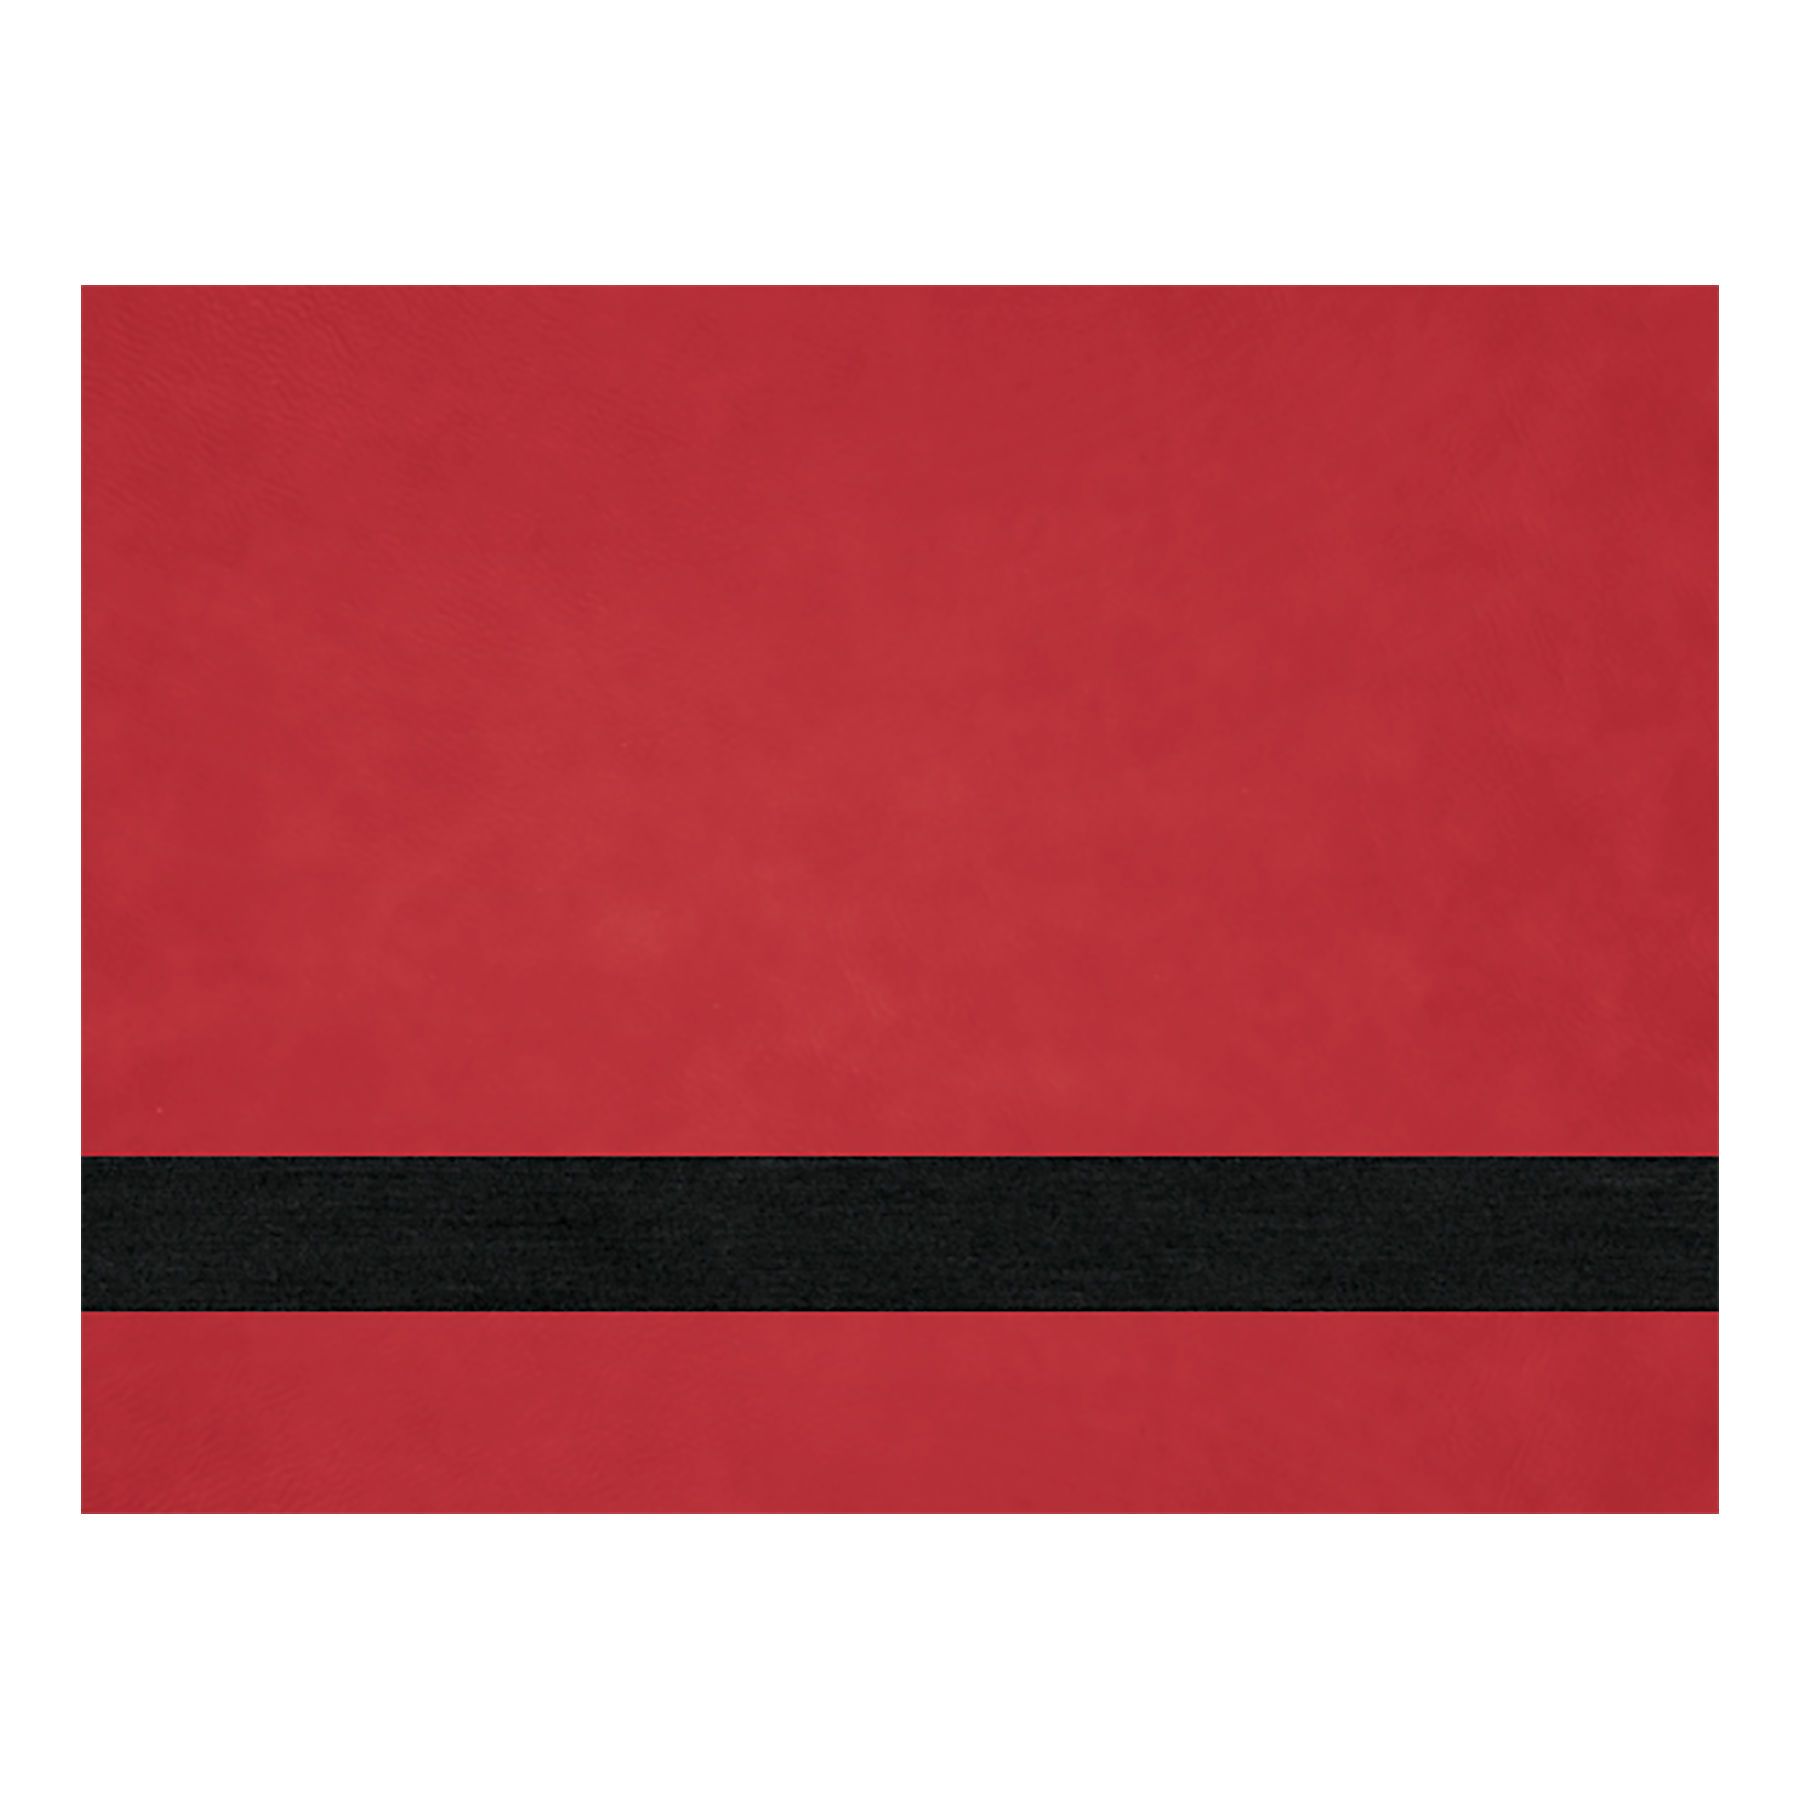 PRE-ORDER! Full Size Laserable Leatherette Sheet Stock, Omtech Laser Engravers (Available Jan. 2022) Engraving Supplies Craftworks NW 24x16 (24" x 16") Red/Black 